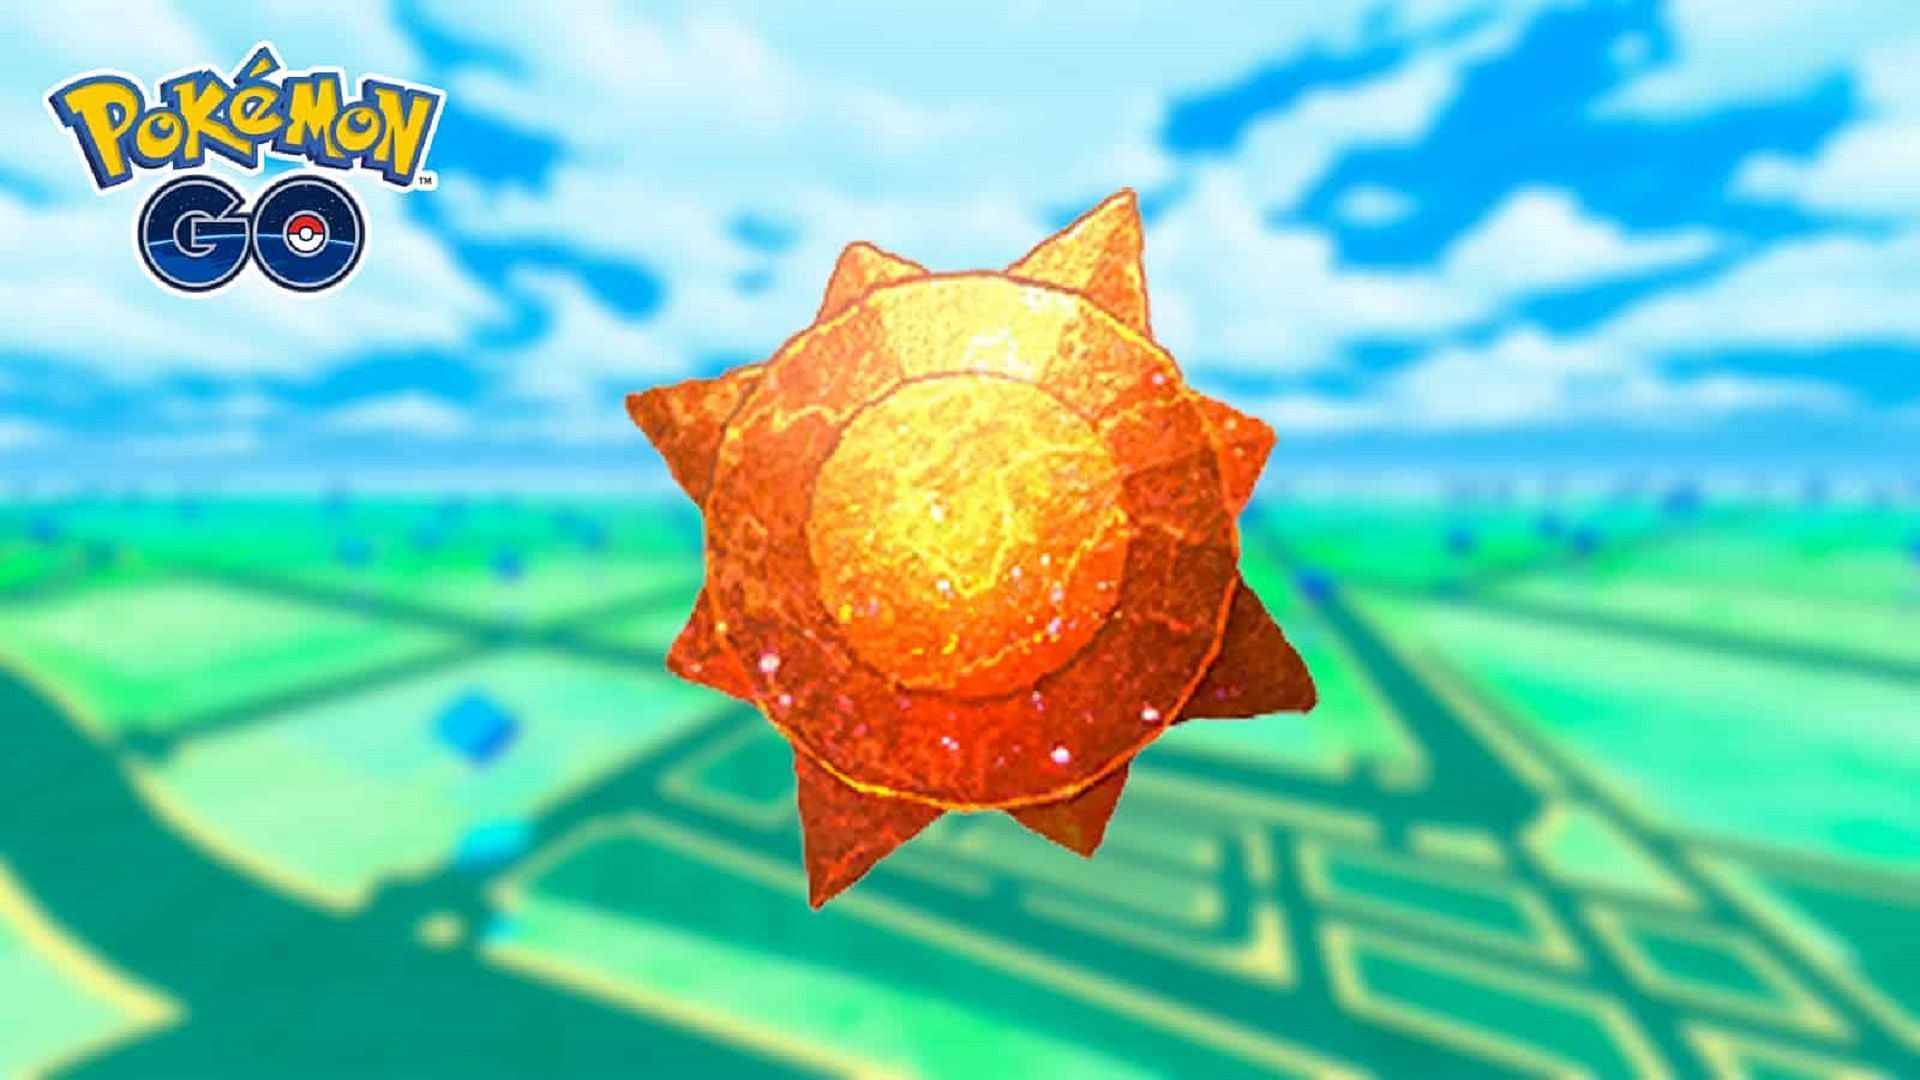 The Sun Stone was one of the first evolution items introduced in Pokemon GO (Image via Niantic)